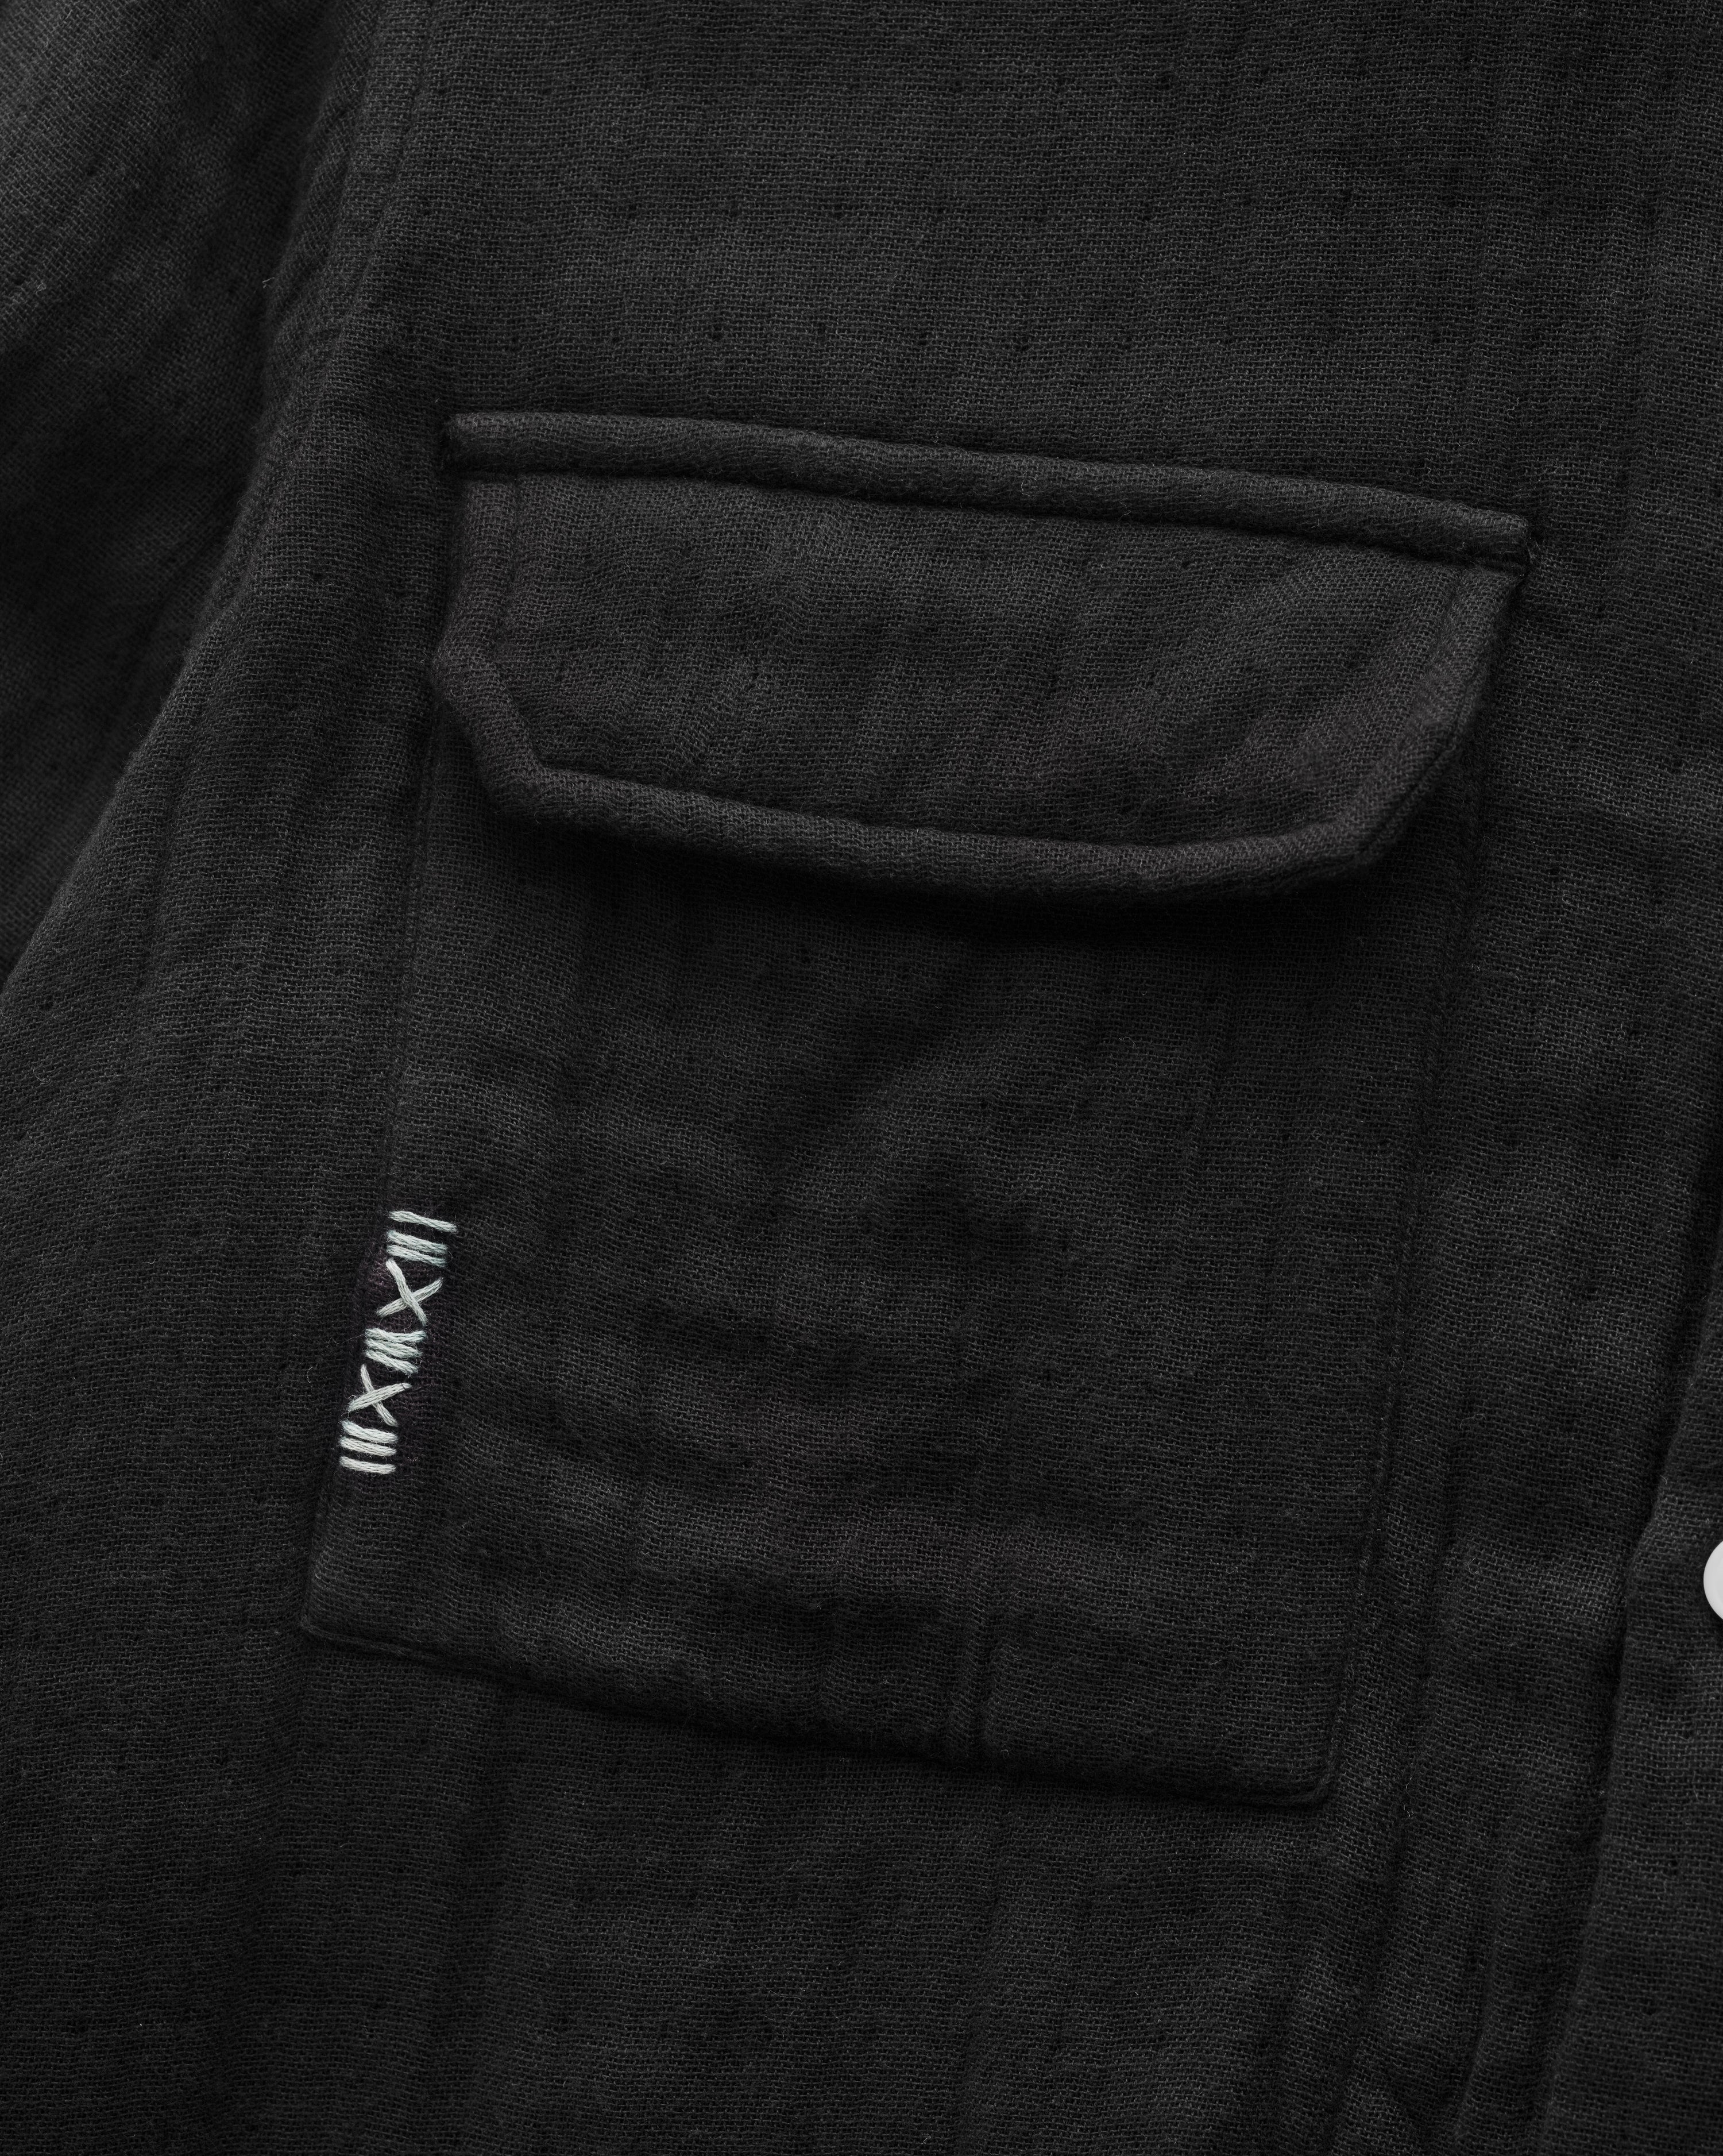 FIELD SHIRT - BLACK TRIPLE GAUZE COTTON WITH NATURALLY DYED HAND MENDING